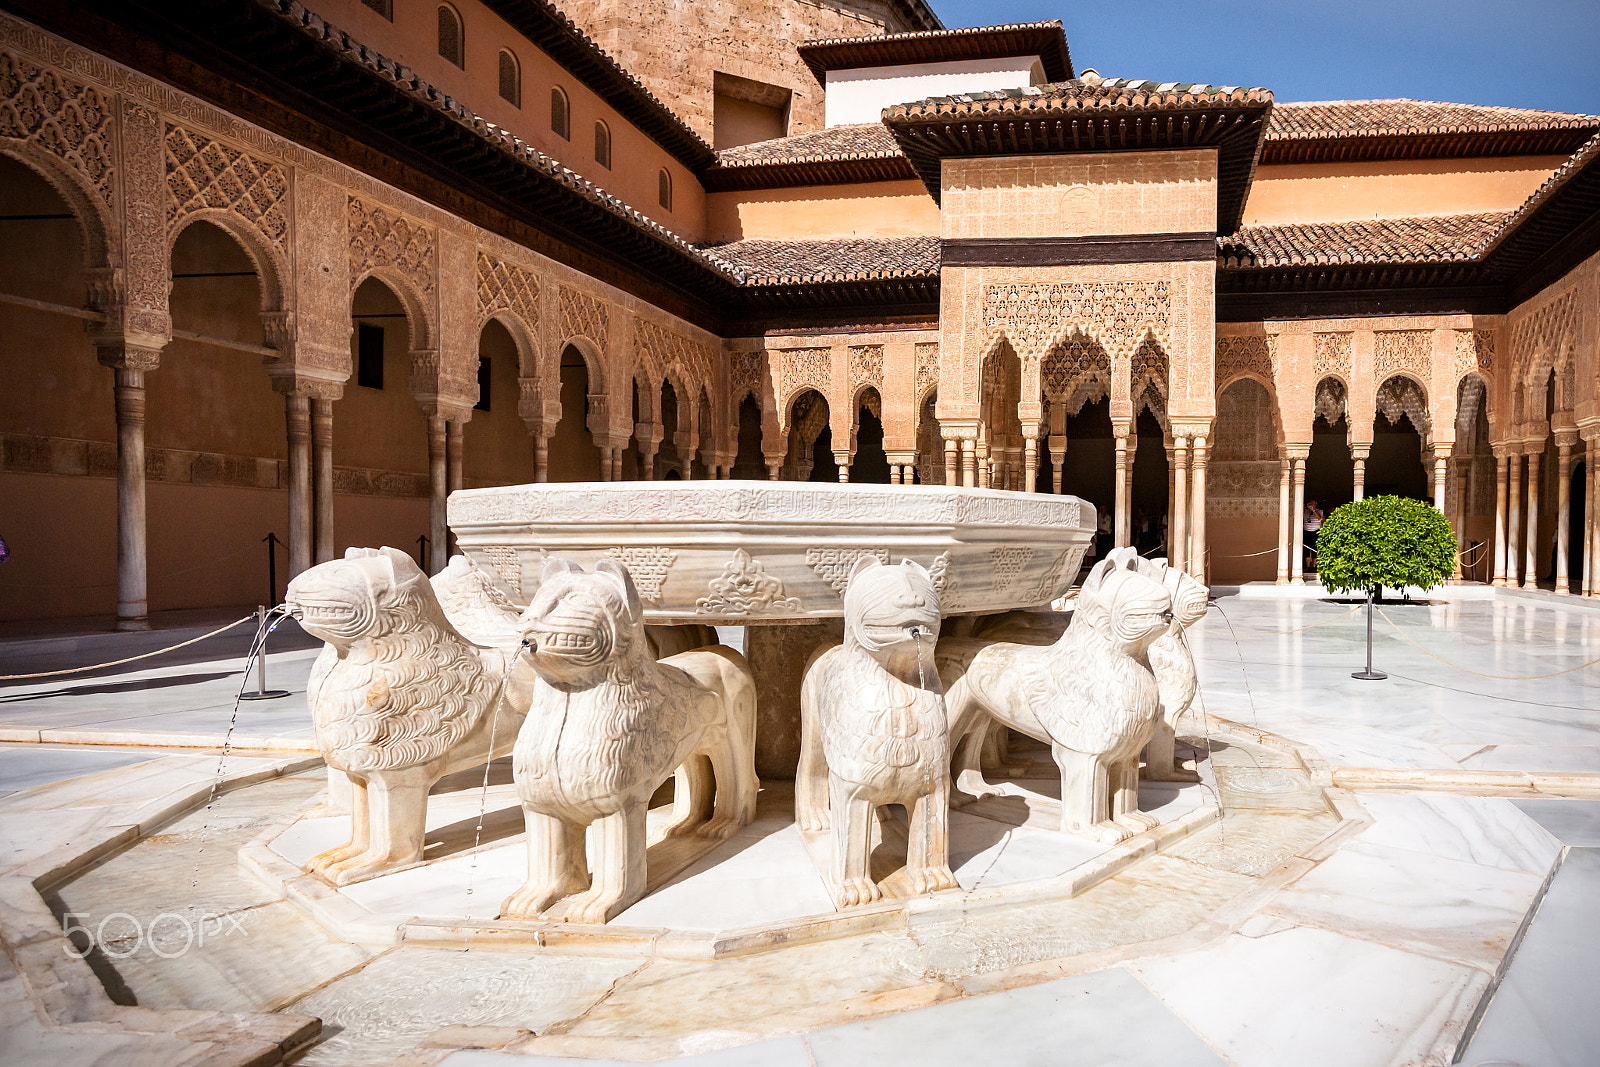 Sony Alpha DSLR-A900 sample photo. The court of lions, granada, alhambra, spain photography